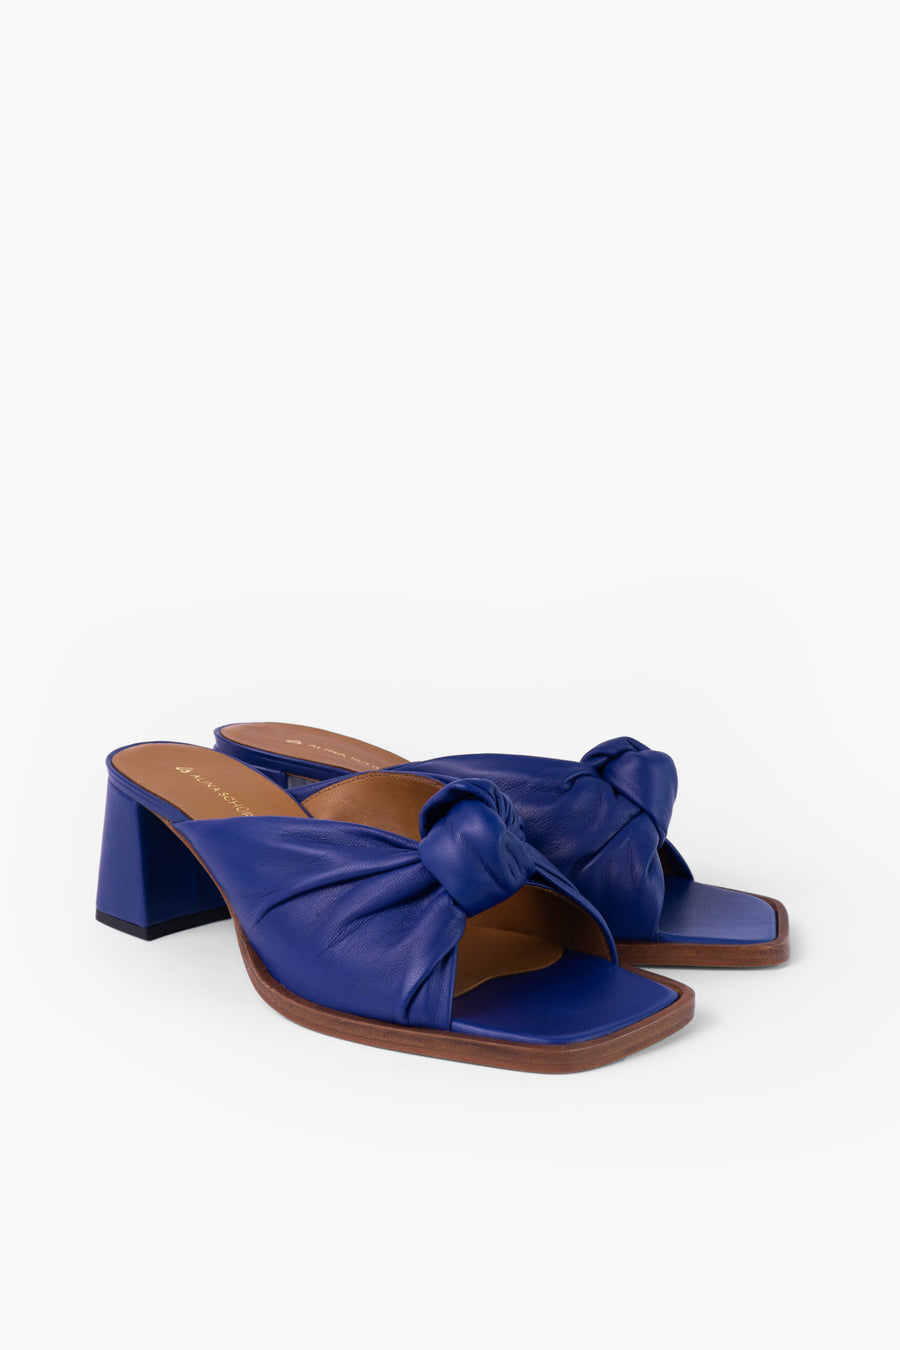 Sustainable, blue coloured Sandal with knot. Locally produced in Hamburg from metal-free tanned leather. Made in Germany by Alina Schürfeld.